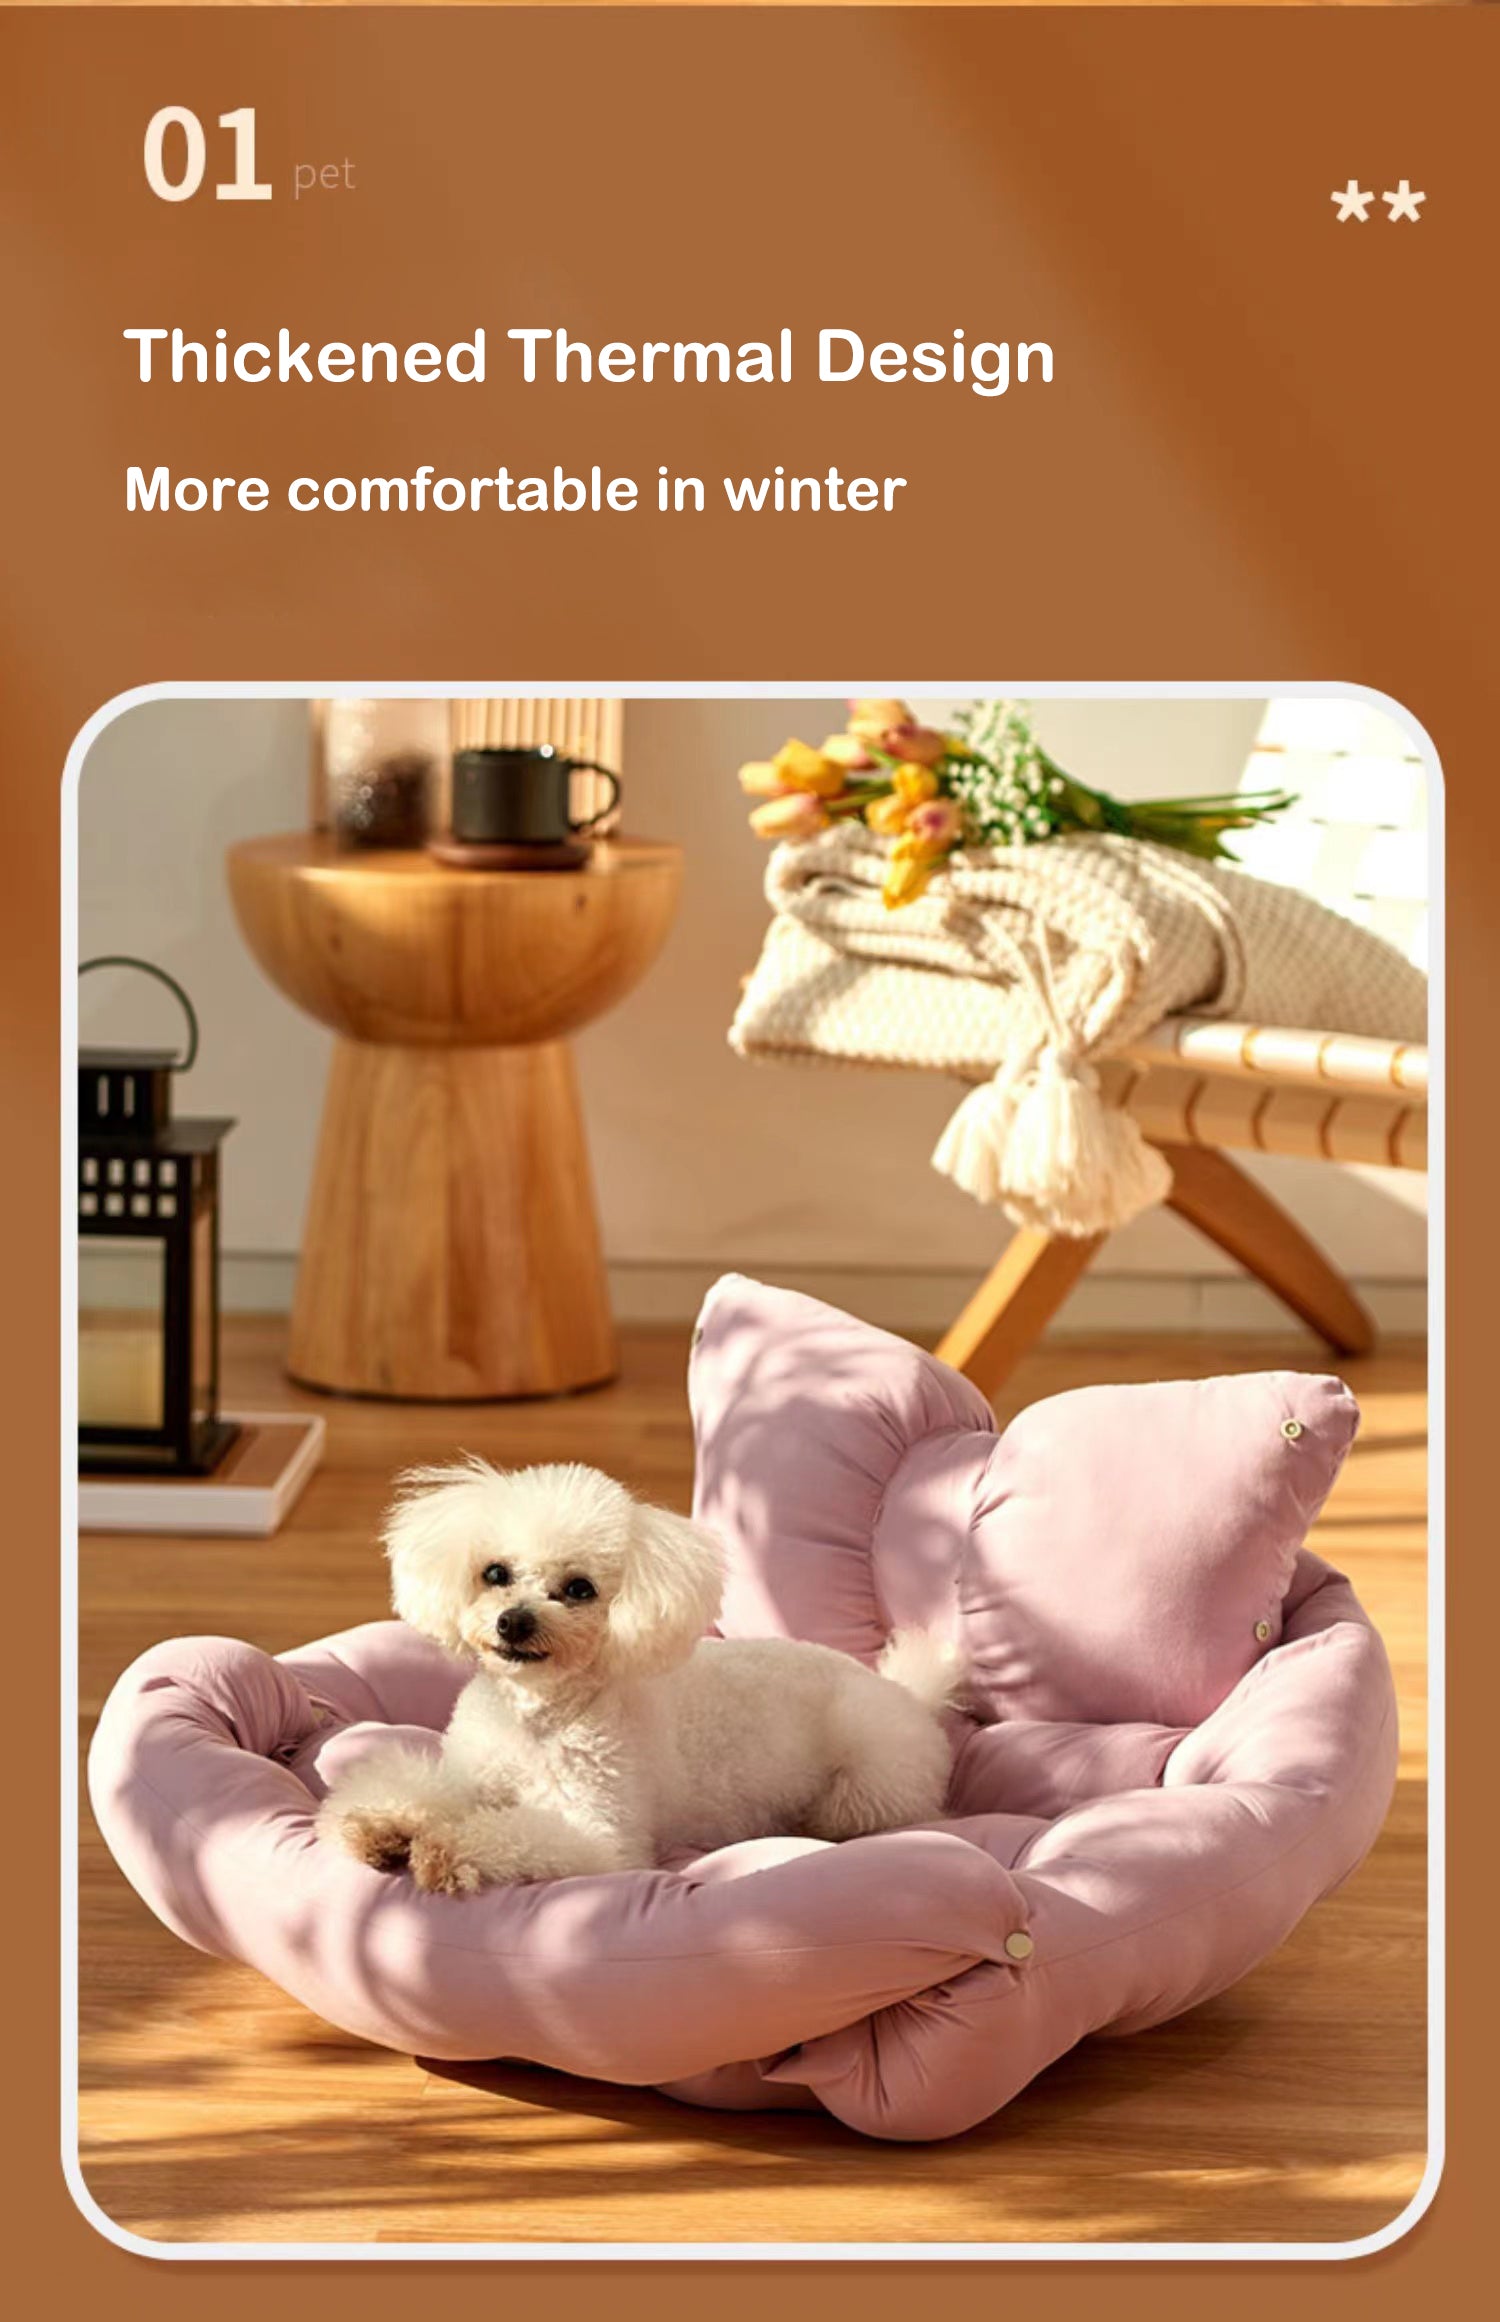 Dogs Nest Cushion Sofa - Thickened Thermal Design, More Comfortable in Winter